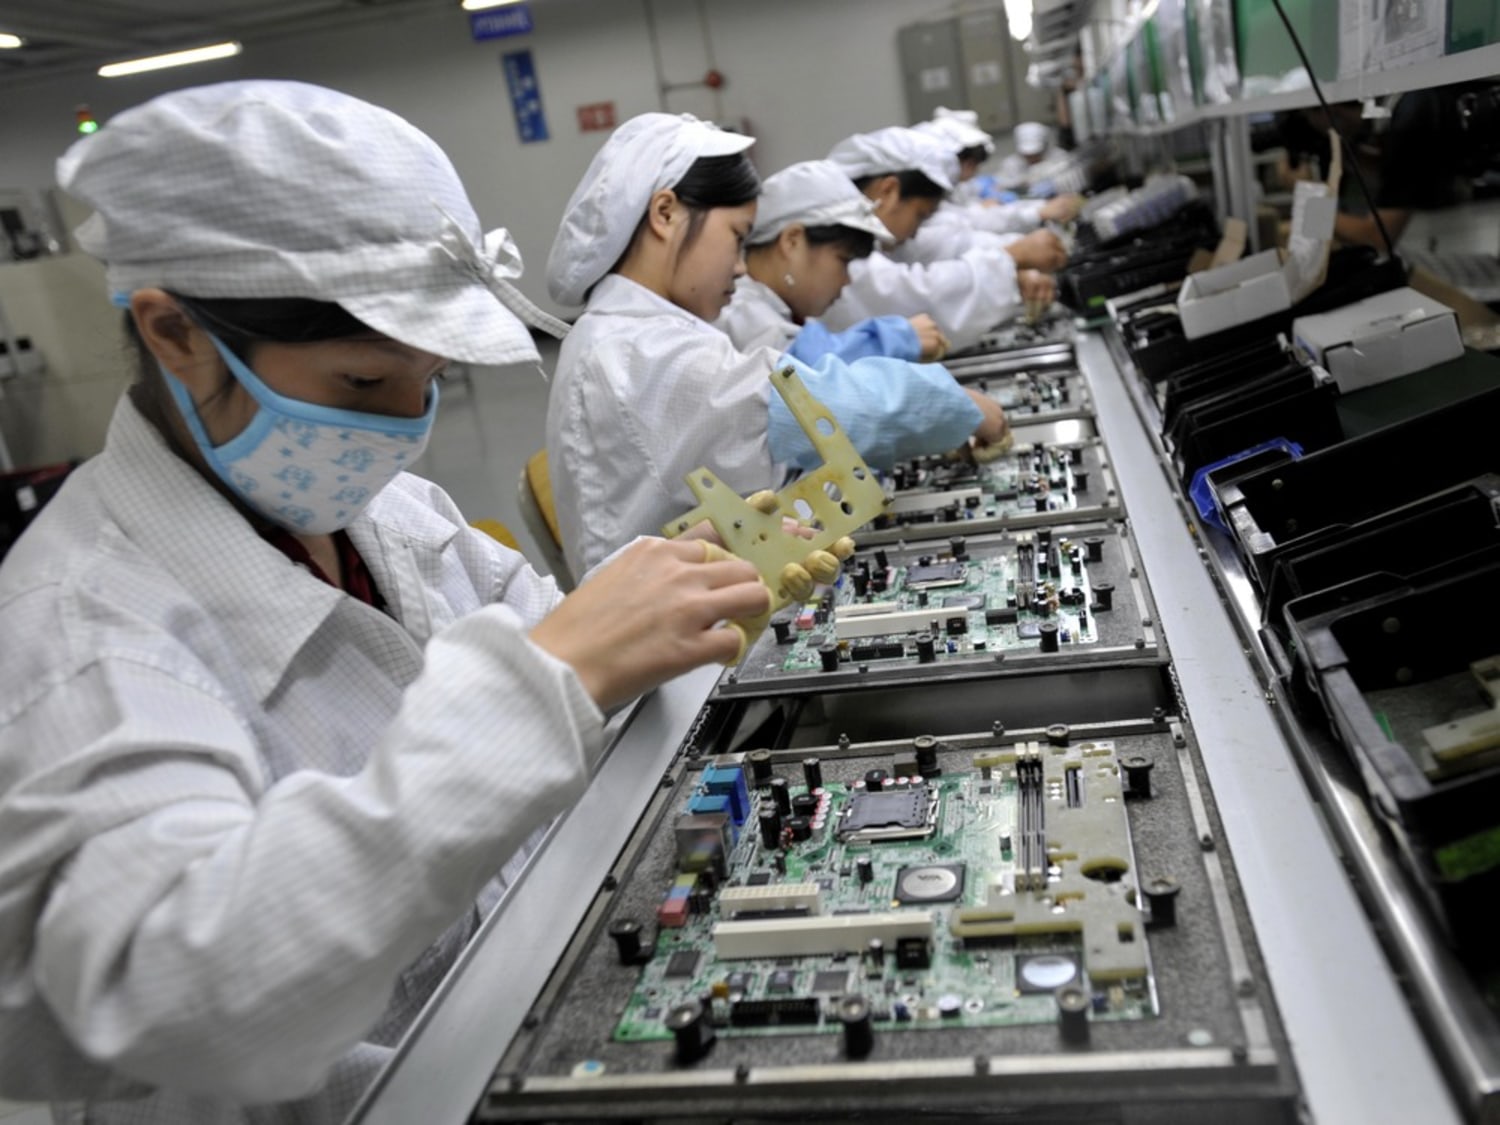 Apple iPad maker gives China workers a raise